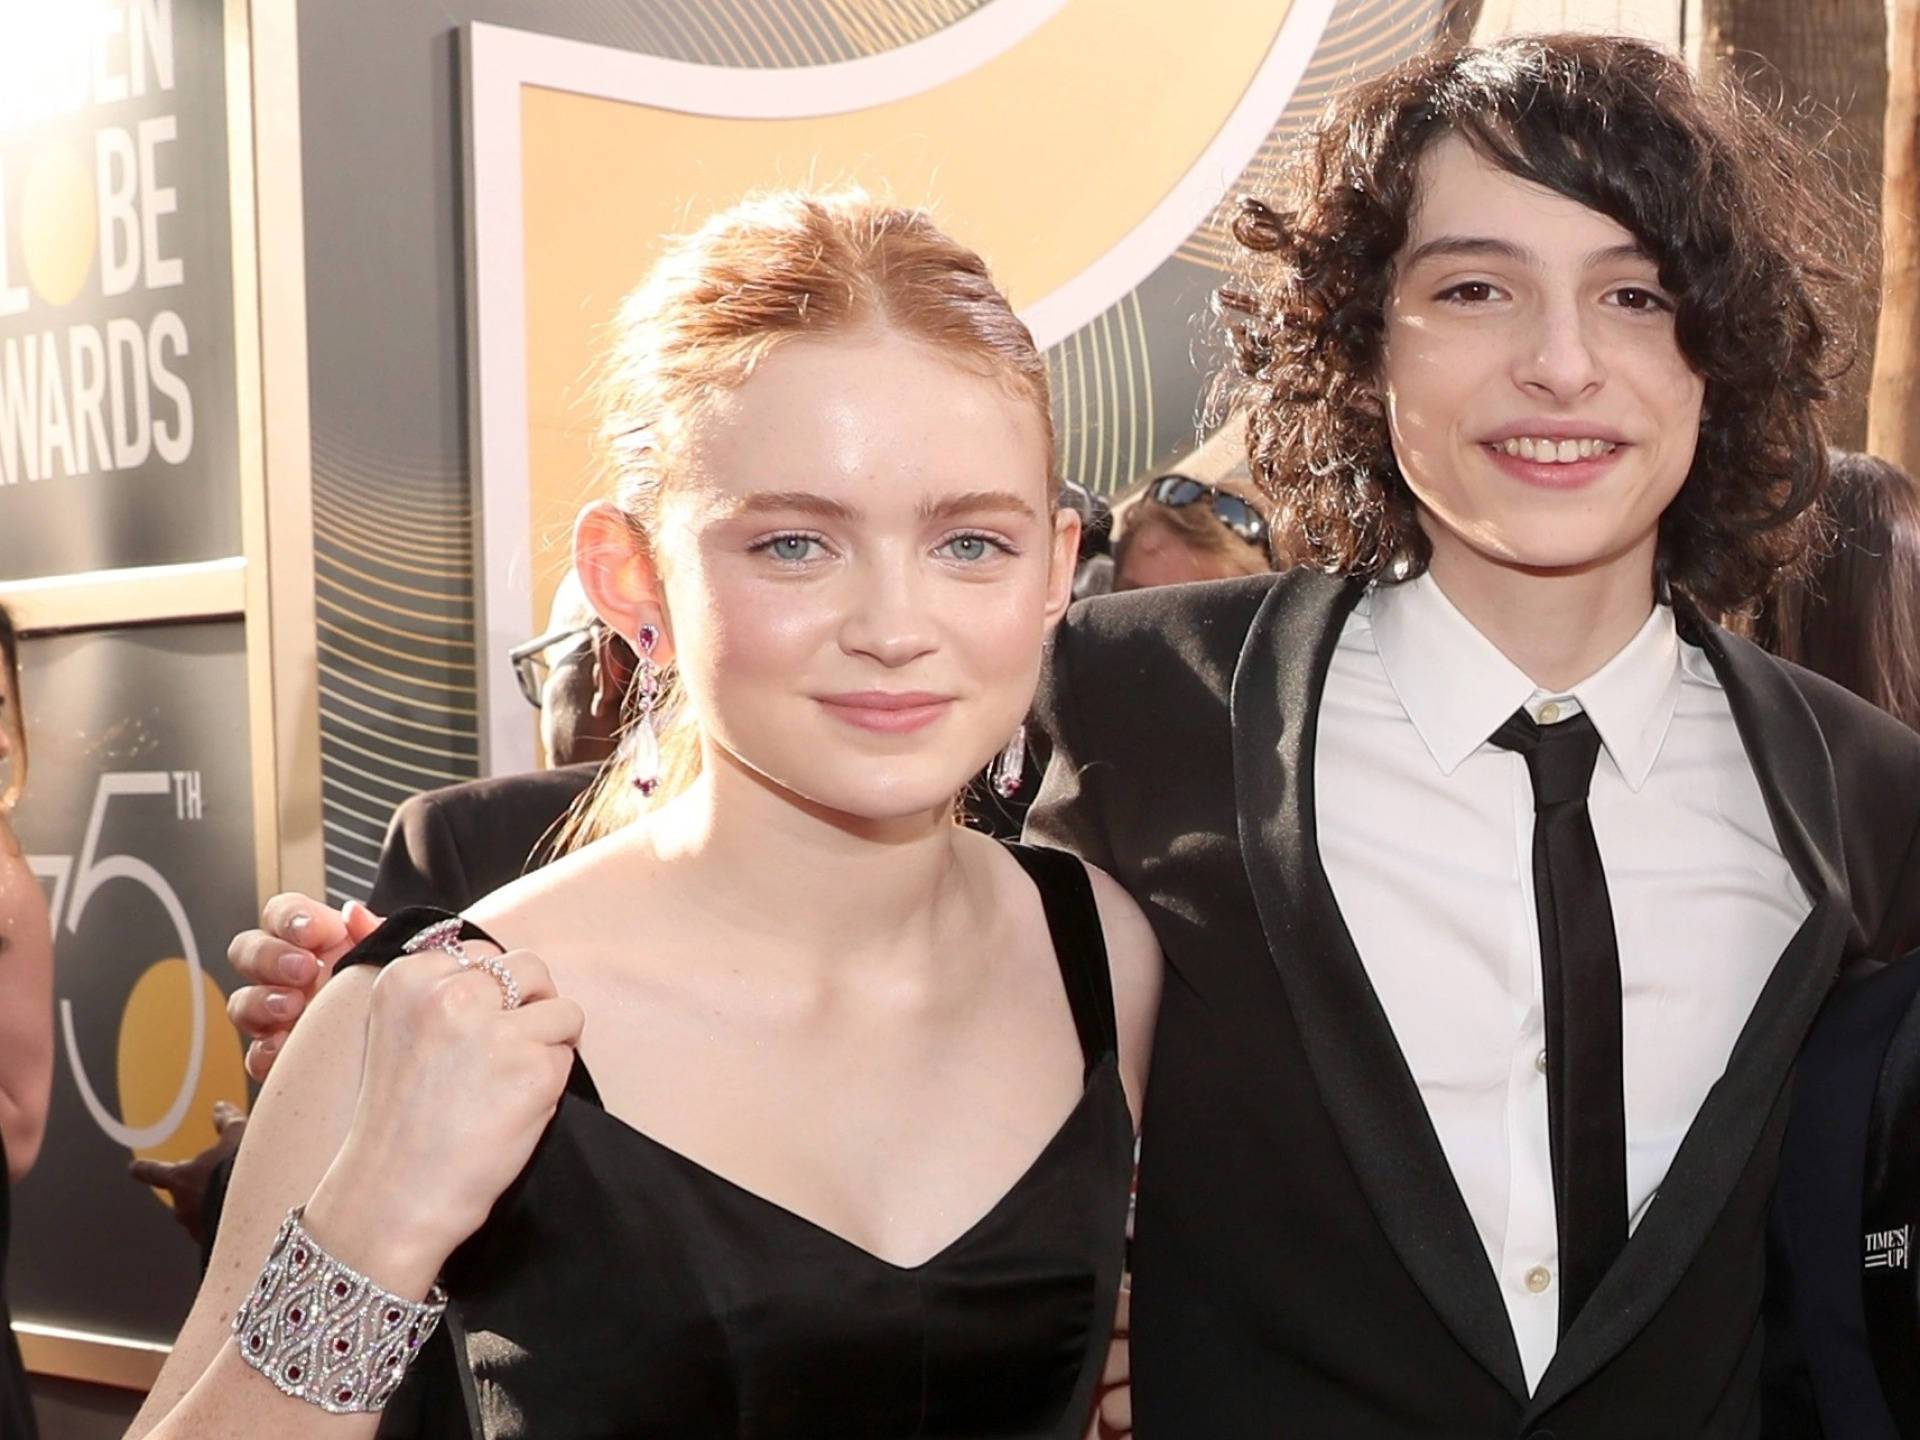 Download Finn Wolfhard With Co-star Wallpaper 